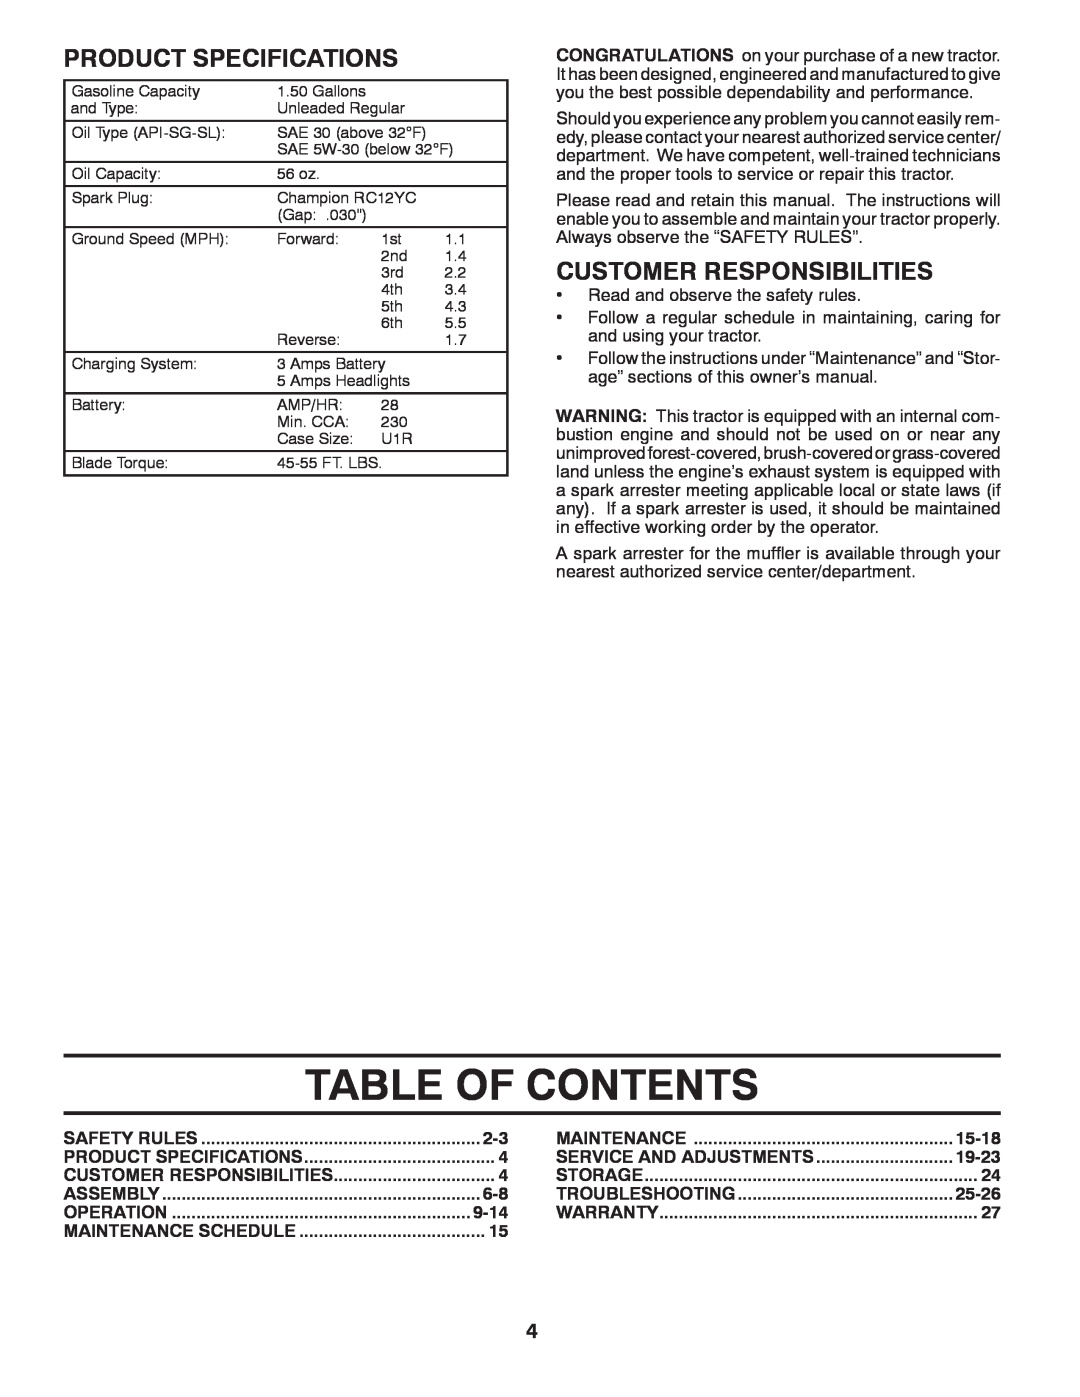 Poulan 96012010900, 433507 manual Table Of Contents, Product Specifications, Customer Responsibilities 